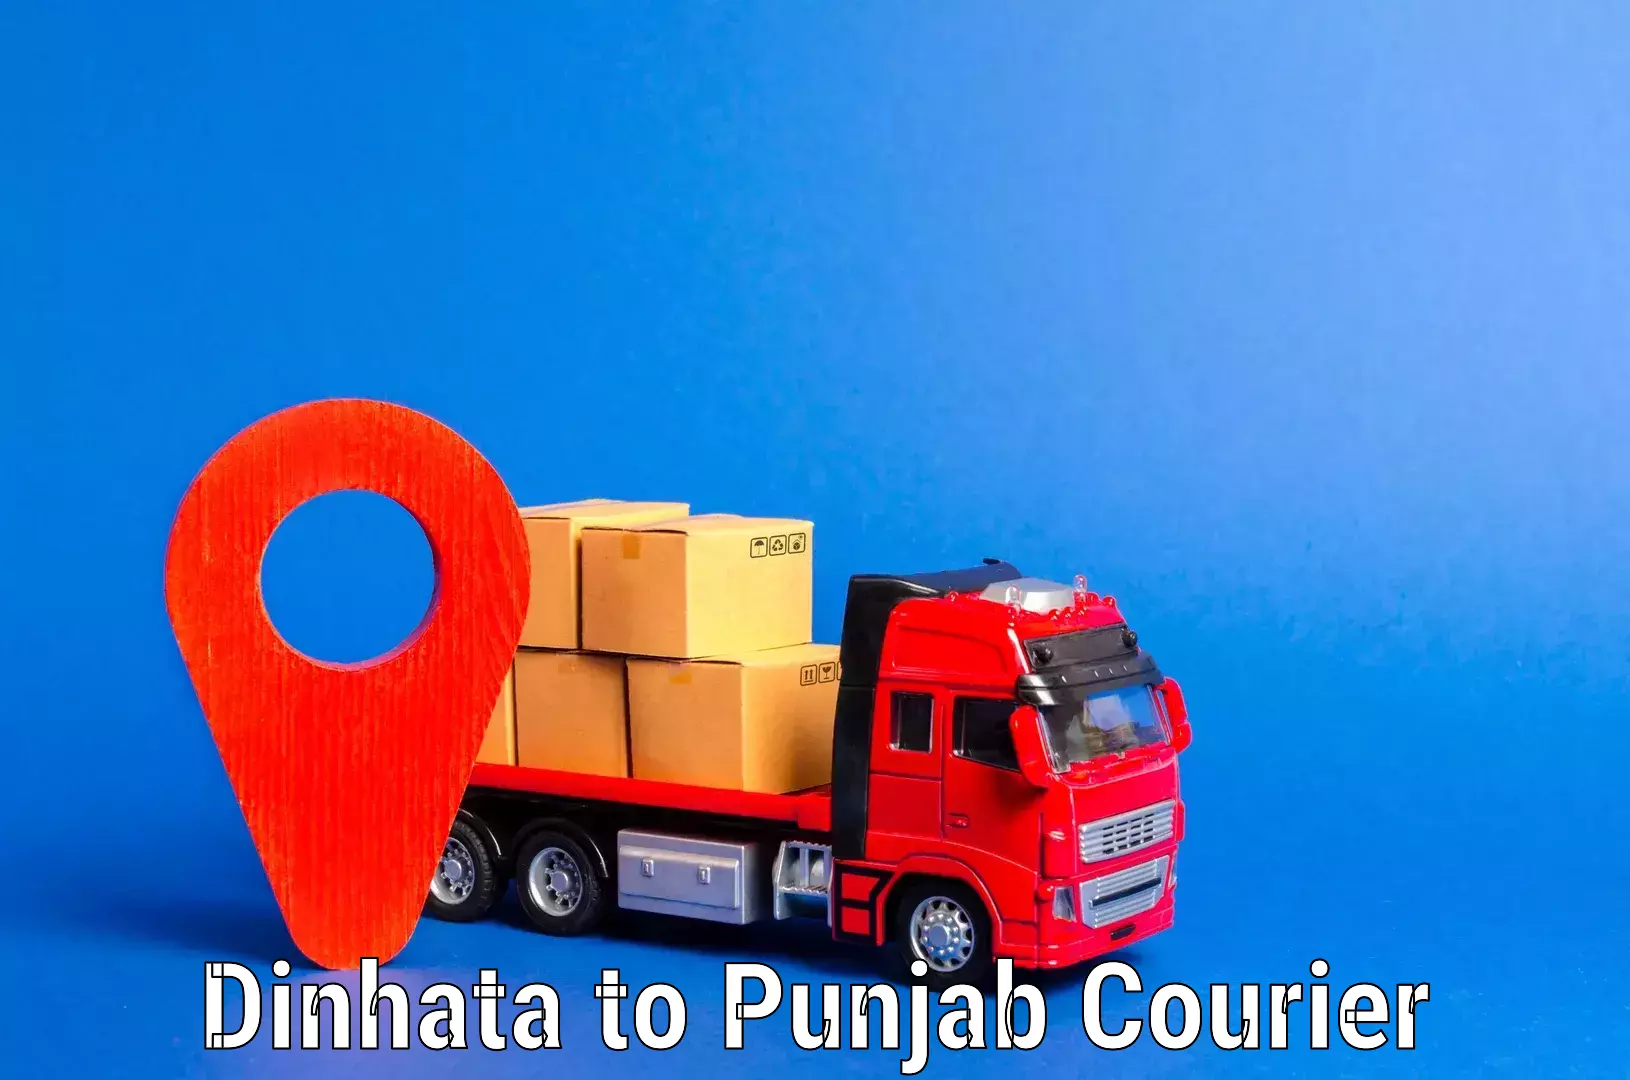 Professional movers and packers Dinhata to Punjab